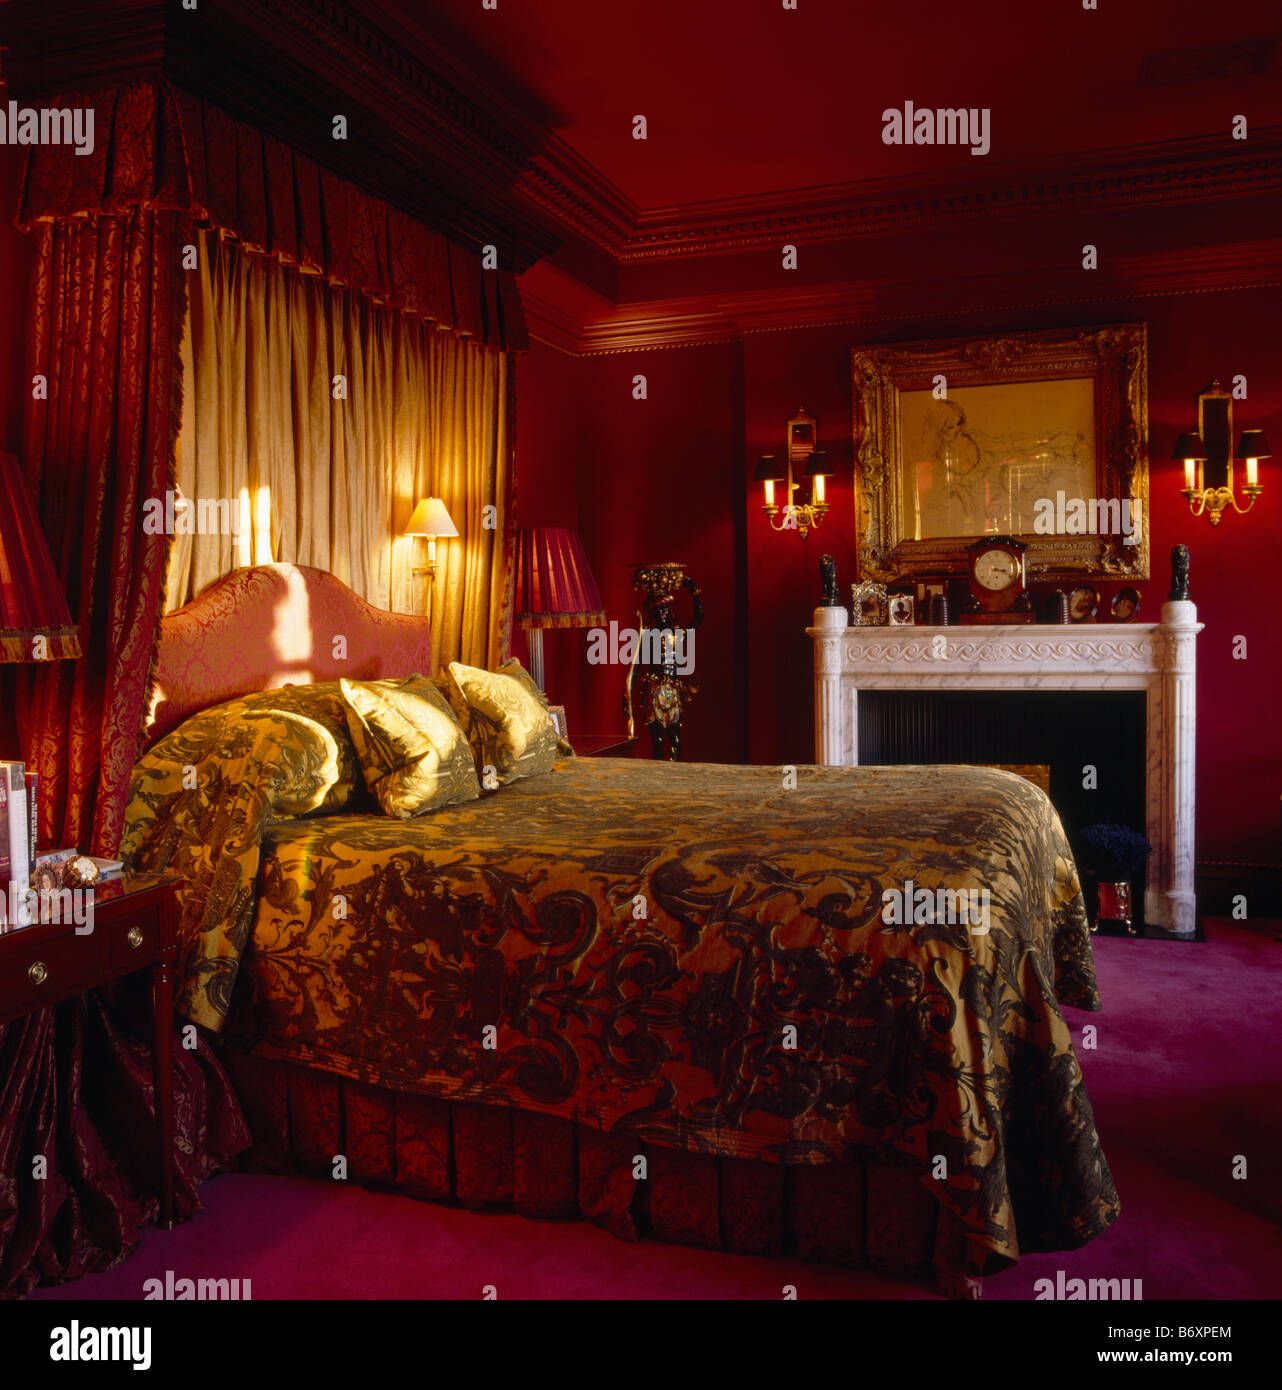 Velvet bedcover on half tester bed with lighted wall lights and cream drapes in dark red bedroom with marble fireplace Stock Photo